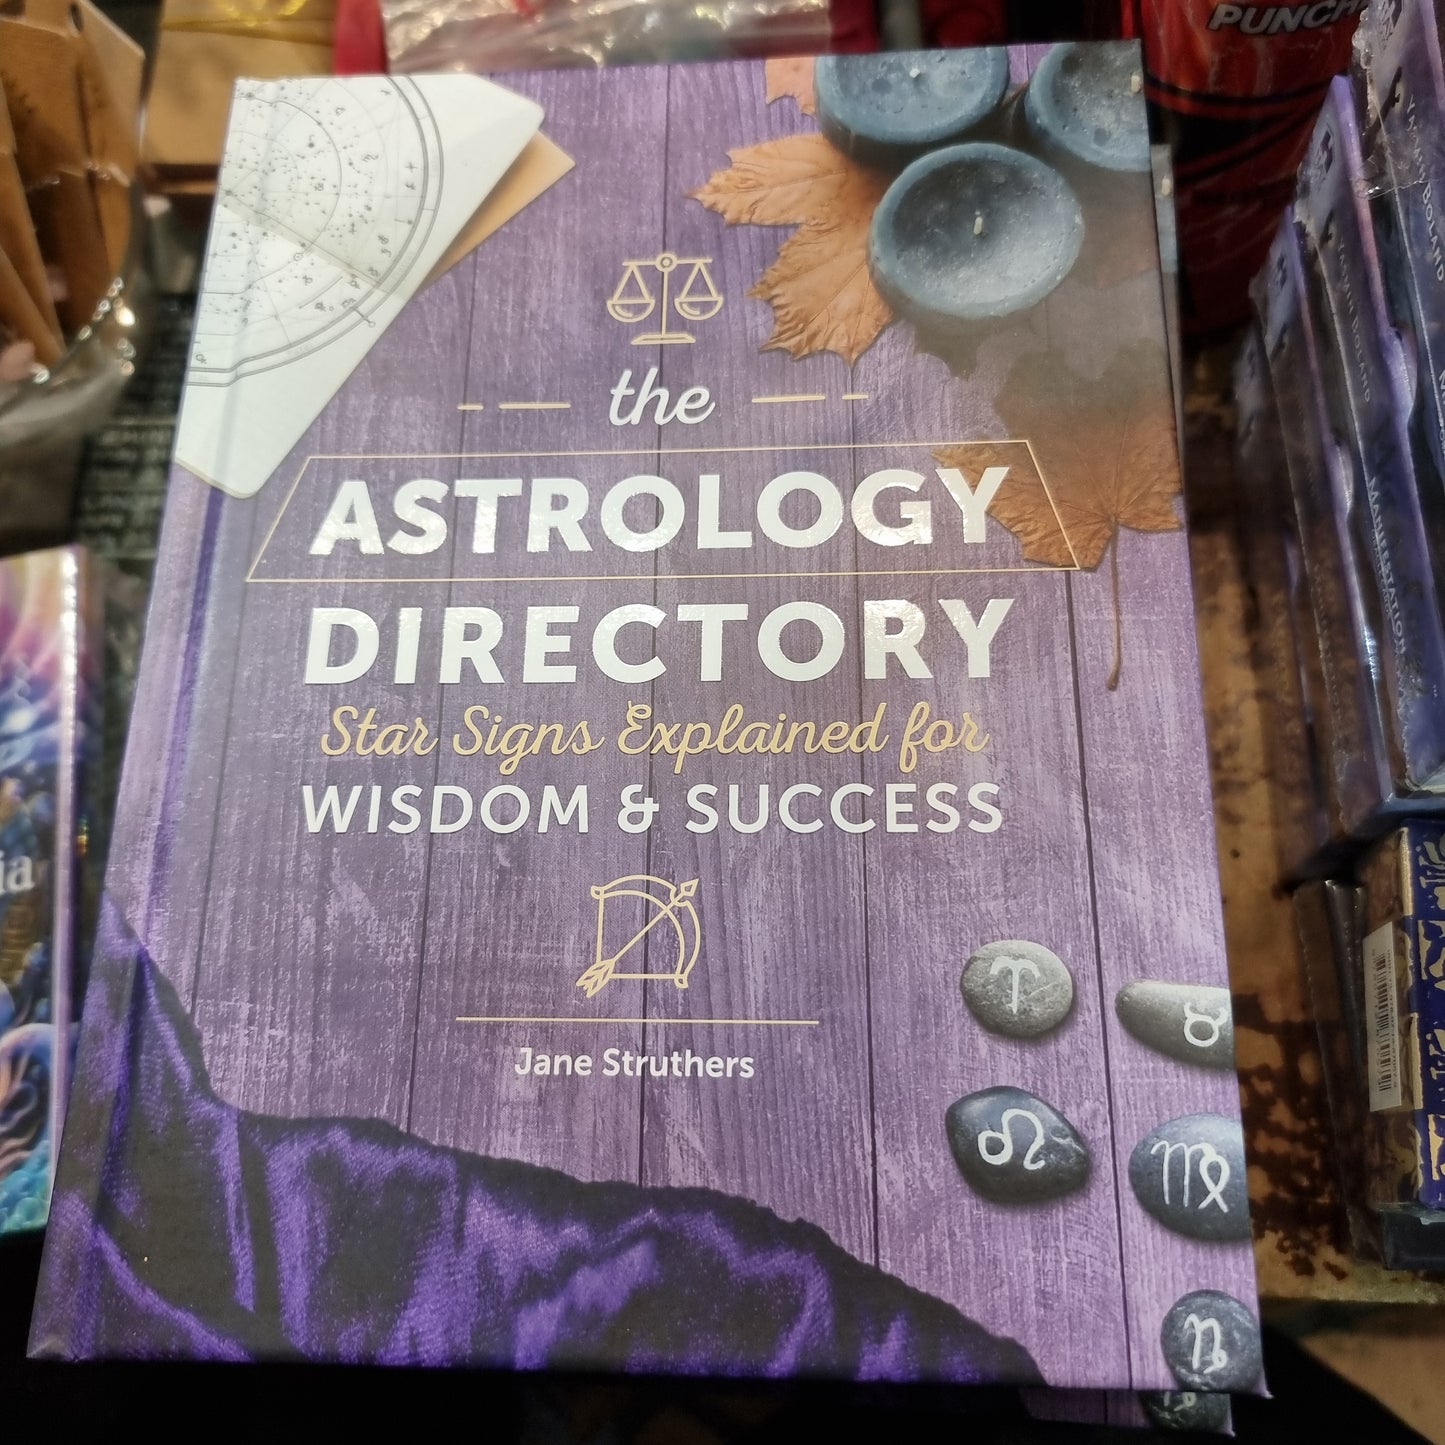 The astrology directory - Rivendell Shop